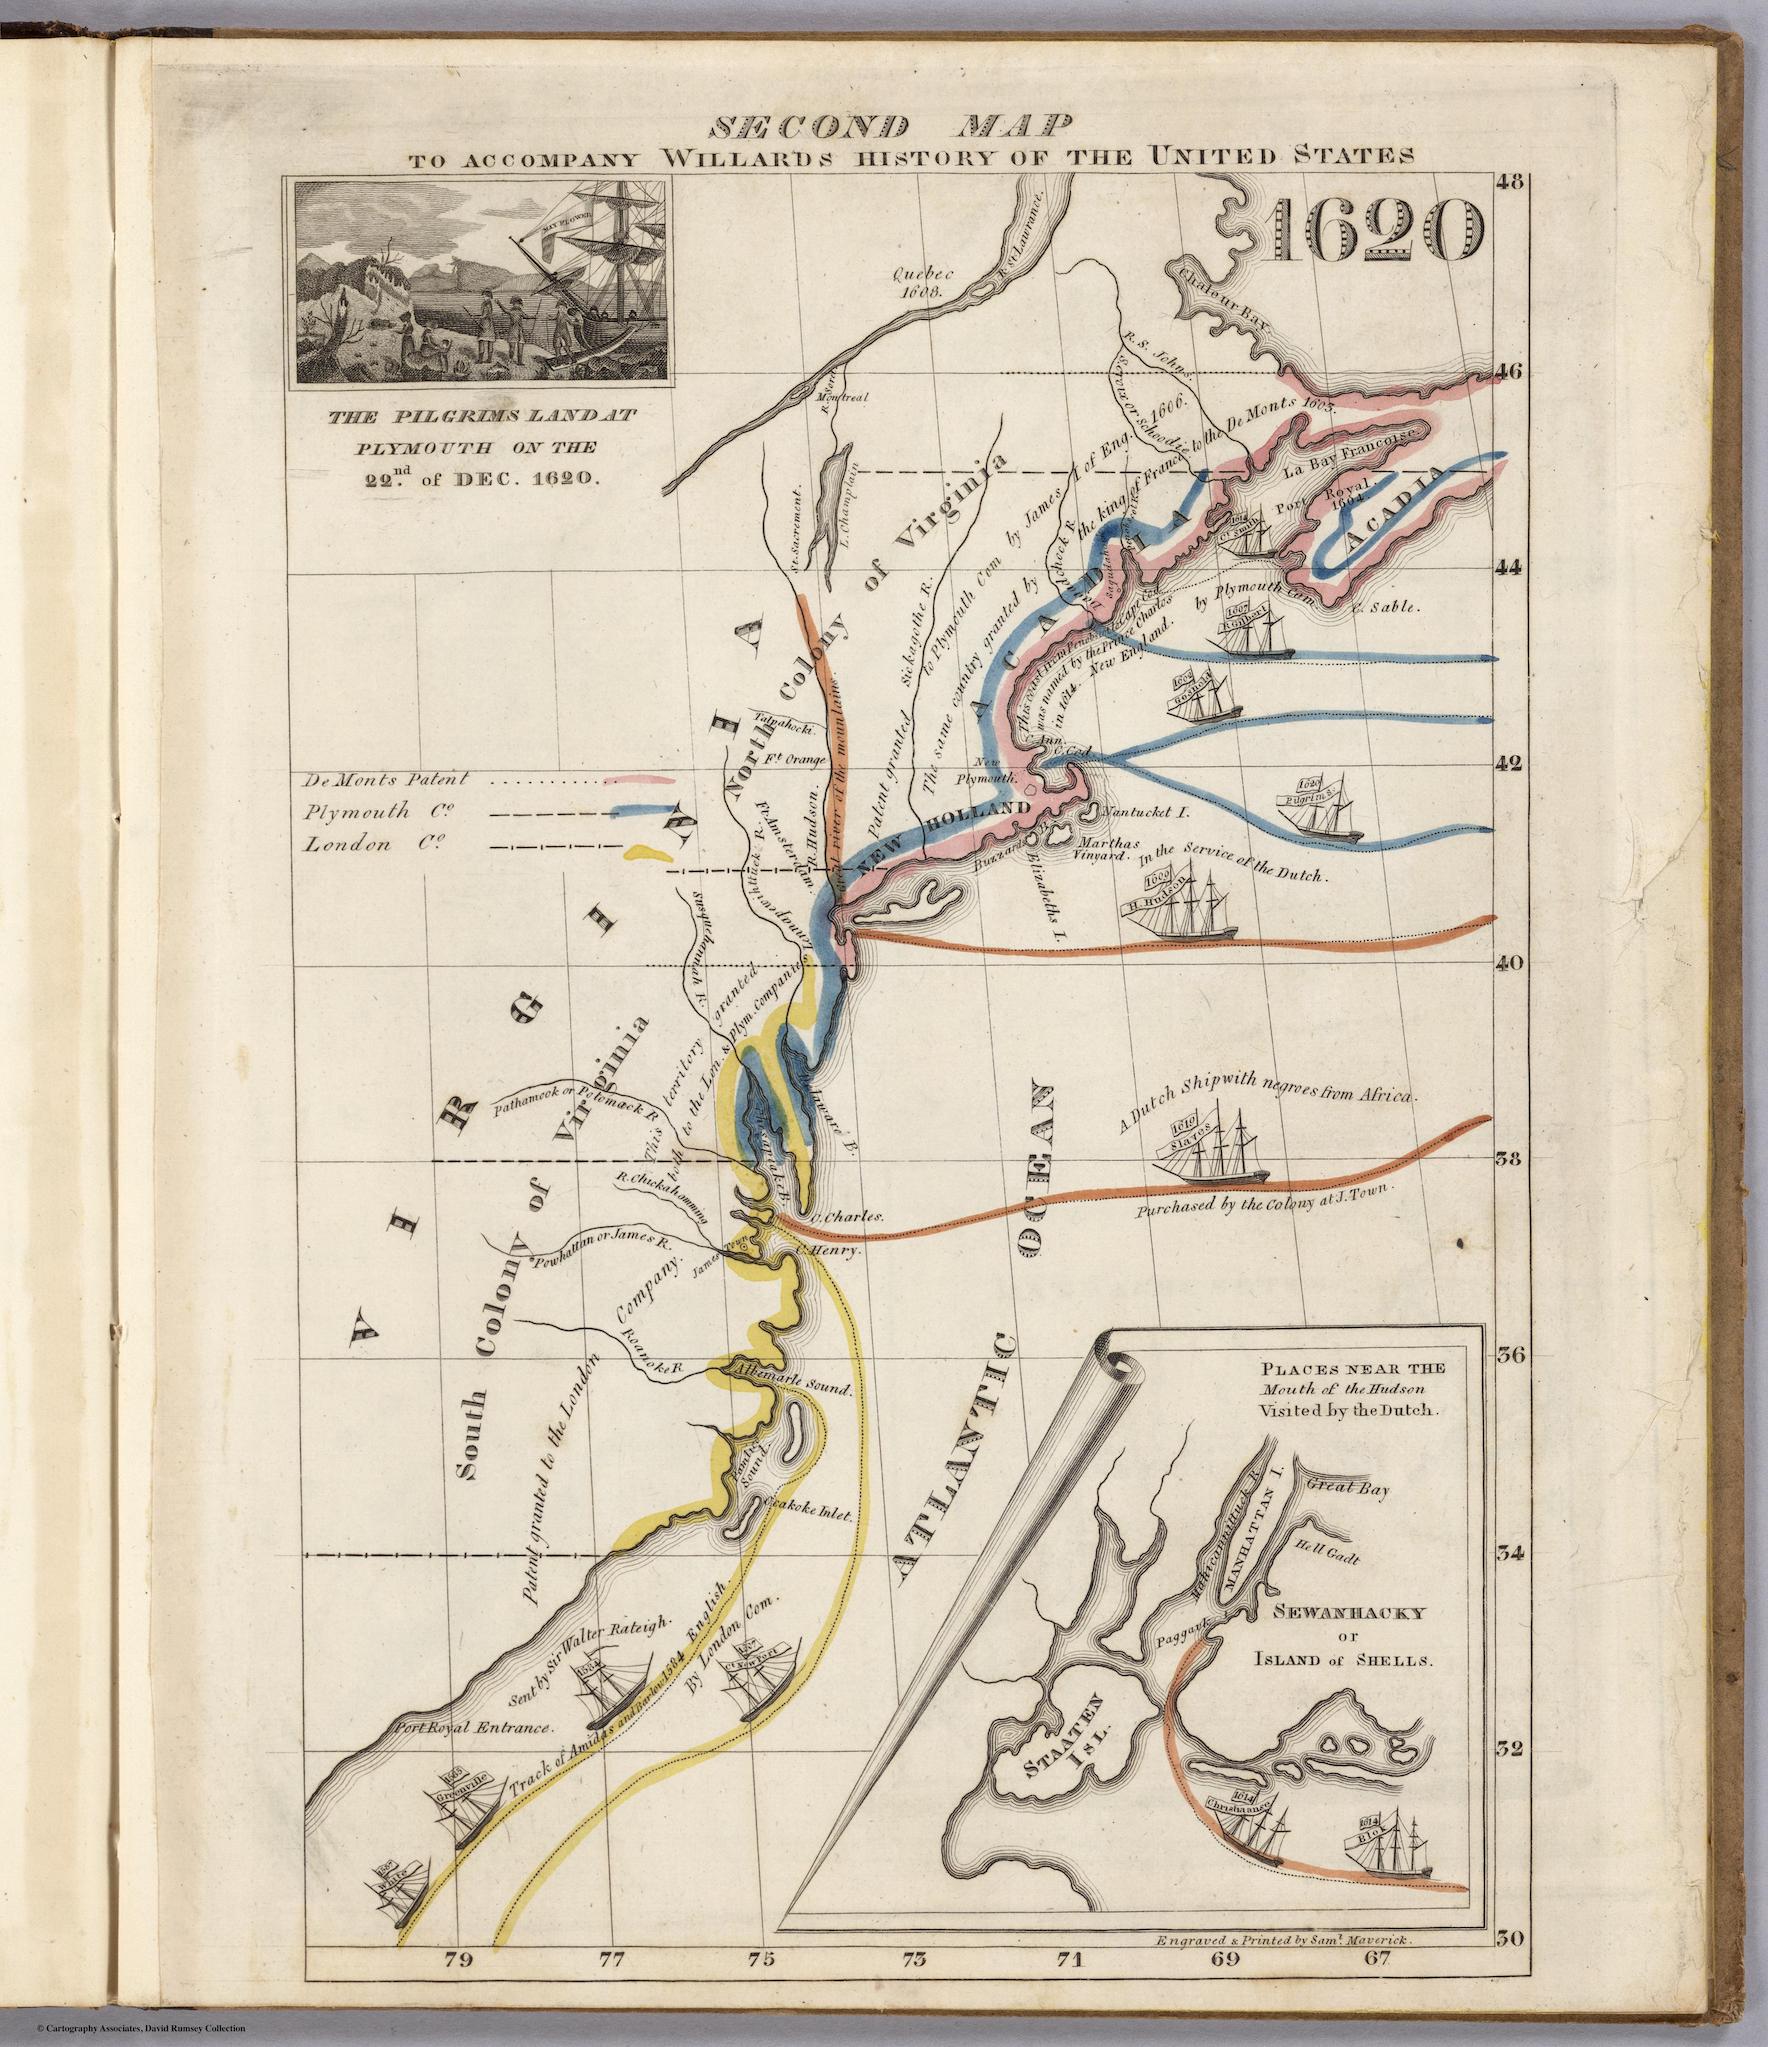 A map of the coast of Virginia depicting various highlighted paths ships took coming from the Atlantic Ocean. As with the rest of the maps in the series, latitude and longitude degrees provide the axes on which the land is drawn from a bird’s-eye view. Paths are colored in yellow, orange, blue, or pink, representing voyages taken by the London Company, the Dutch, the Plymouth Company, and the De Monts Patent, respectively. A miniature drawing in the top left corner illustrates “Pilgrims land at Plymouth on the 22nd of December 1620,” where several figures, some with guns and some wearing bonnets and dresses, are shown dismounting a ship with a flag that reads the “Mayflower.” Along the coast and beside the ships are details of patents granted and the names of colonial leaders. Ships dated from 1534 to the 1620s Mayflower are drawn across the coast. One ship in particular in the middle of the page is captioned with, “A Dutch Ship with negroes from Africa Purchased by the Colony at J. Town,” and the flags on it read “1619 Slaves.” An illustration of a page being rolled back to reveal “Staaten” Island is drawn in the bottom right-hand corner, where two Dutch ships follow an orange-highlighted path onto the land.